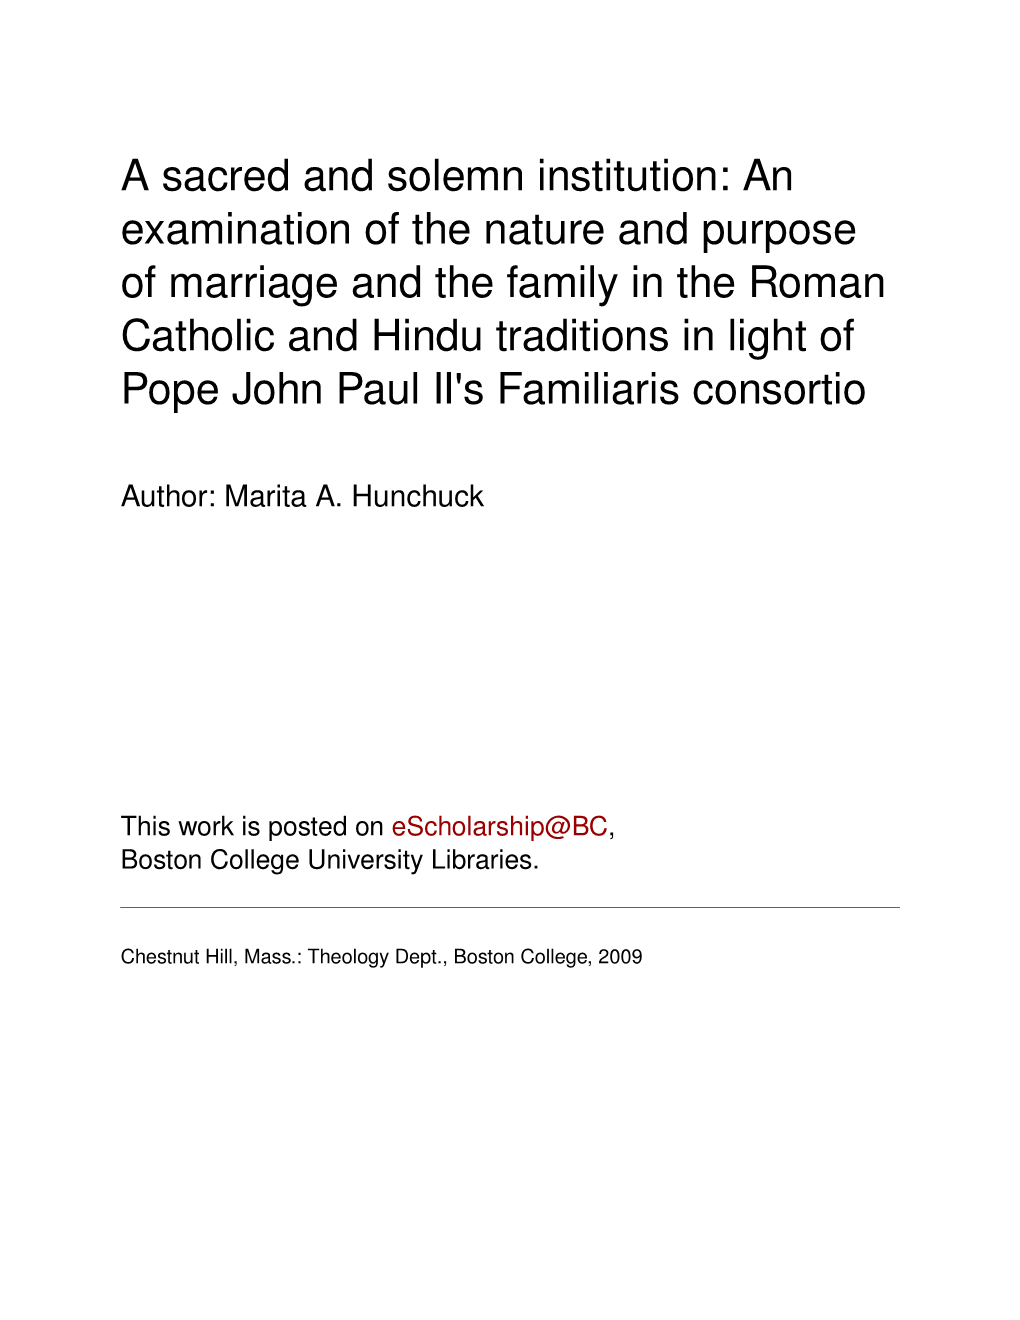 A Sacred and Solemn Institution: an Examination of the Nature and Purpose of Marriage and the Family in the Roman Catholic and H